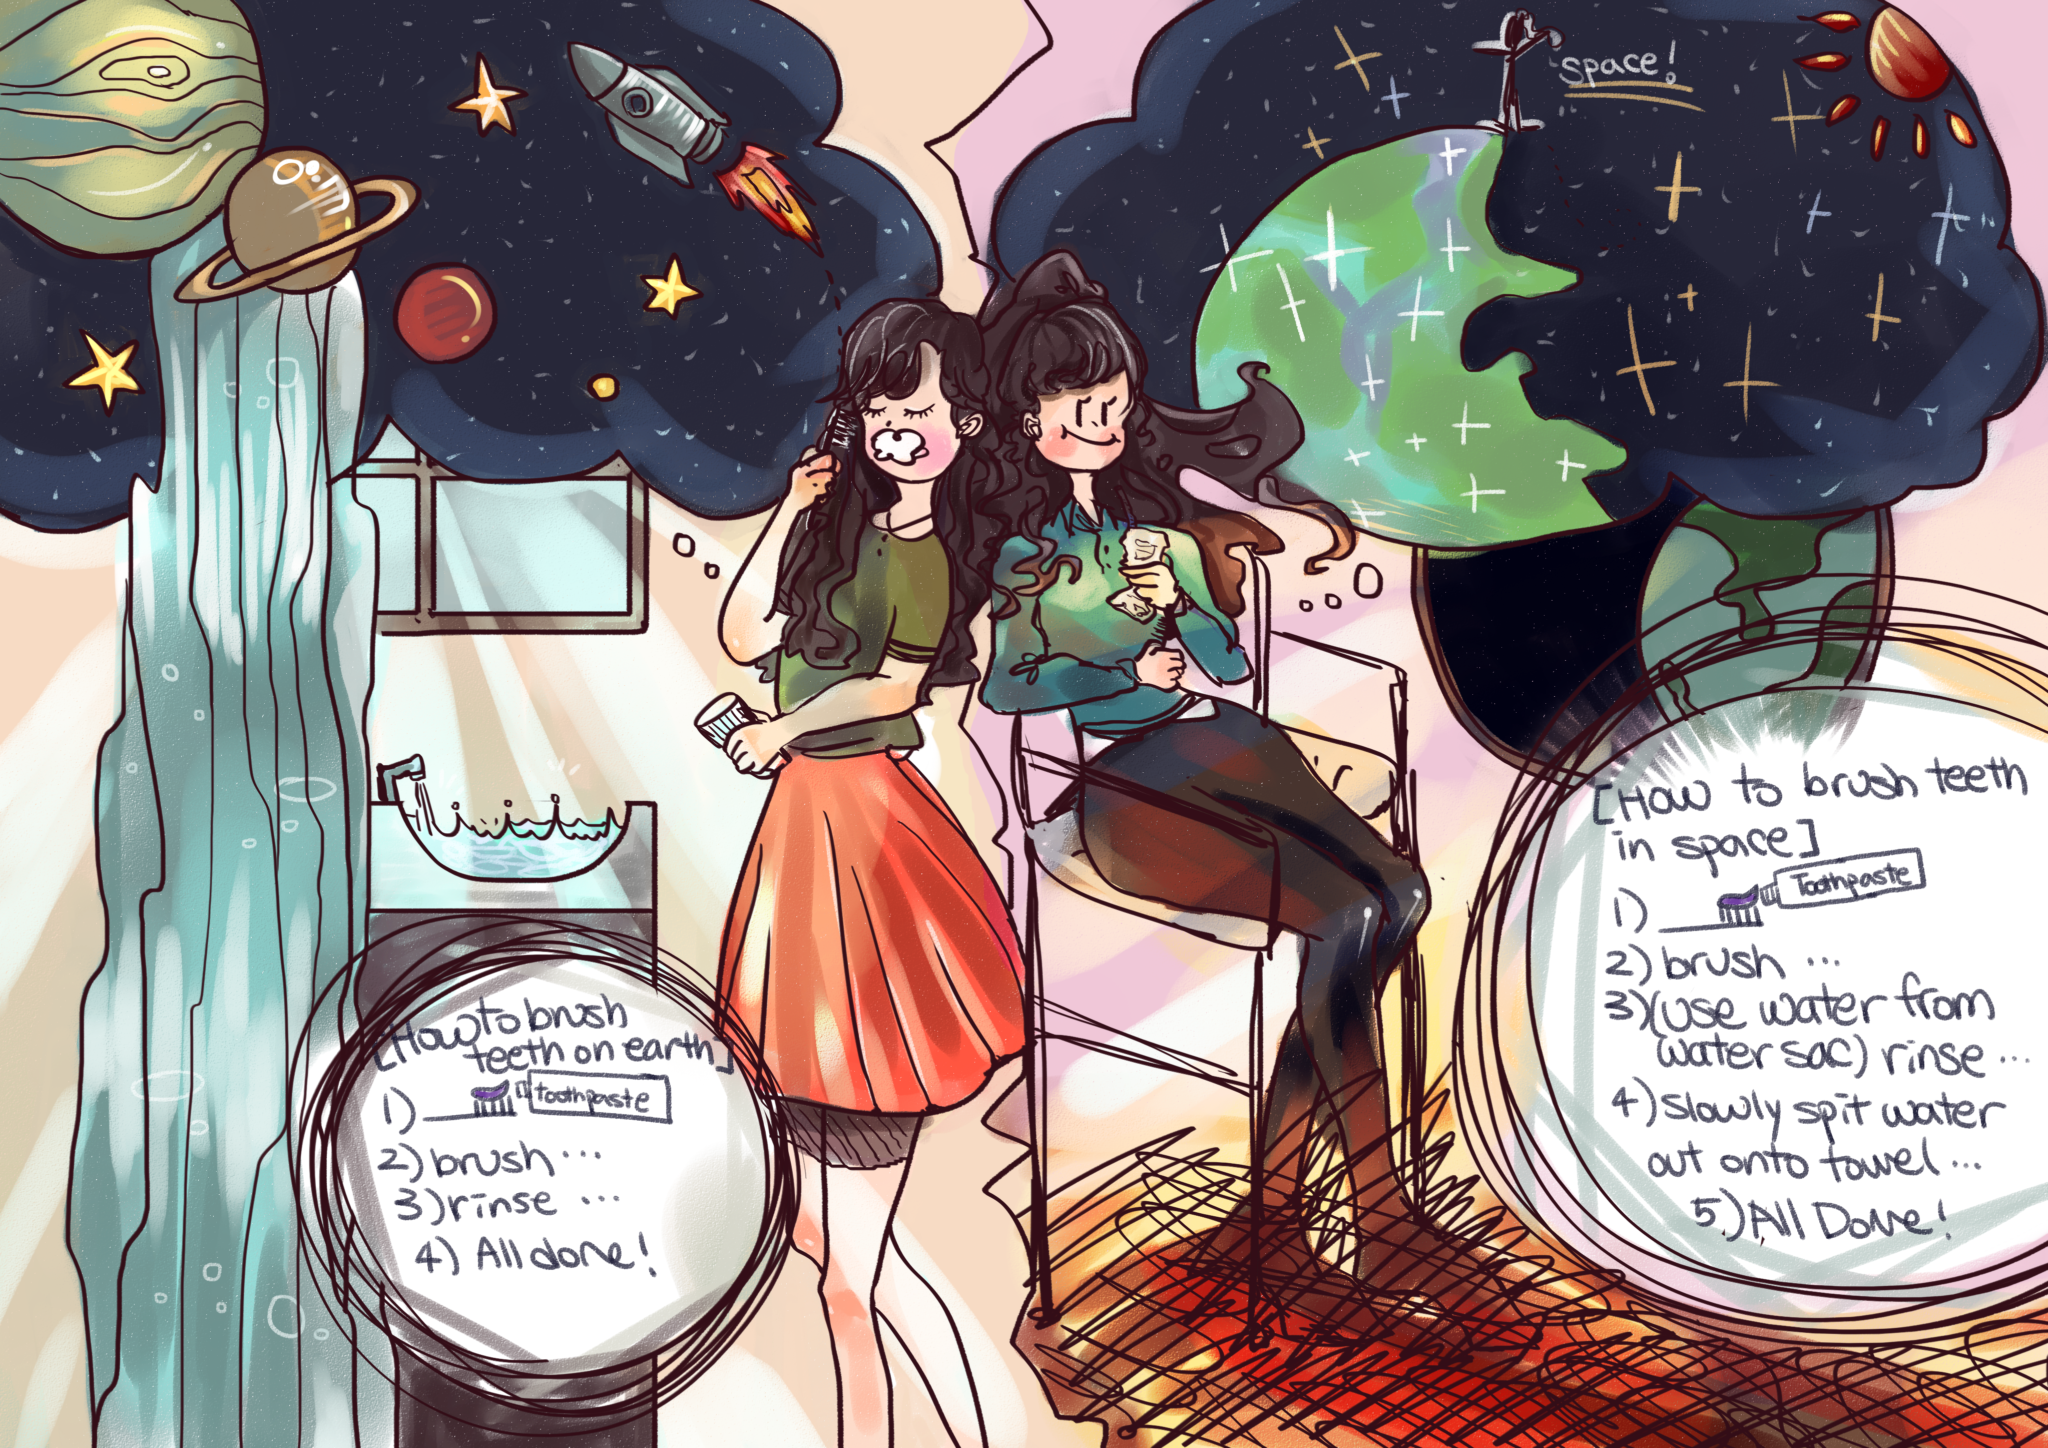 Grace Lee imagines life in space